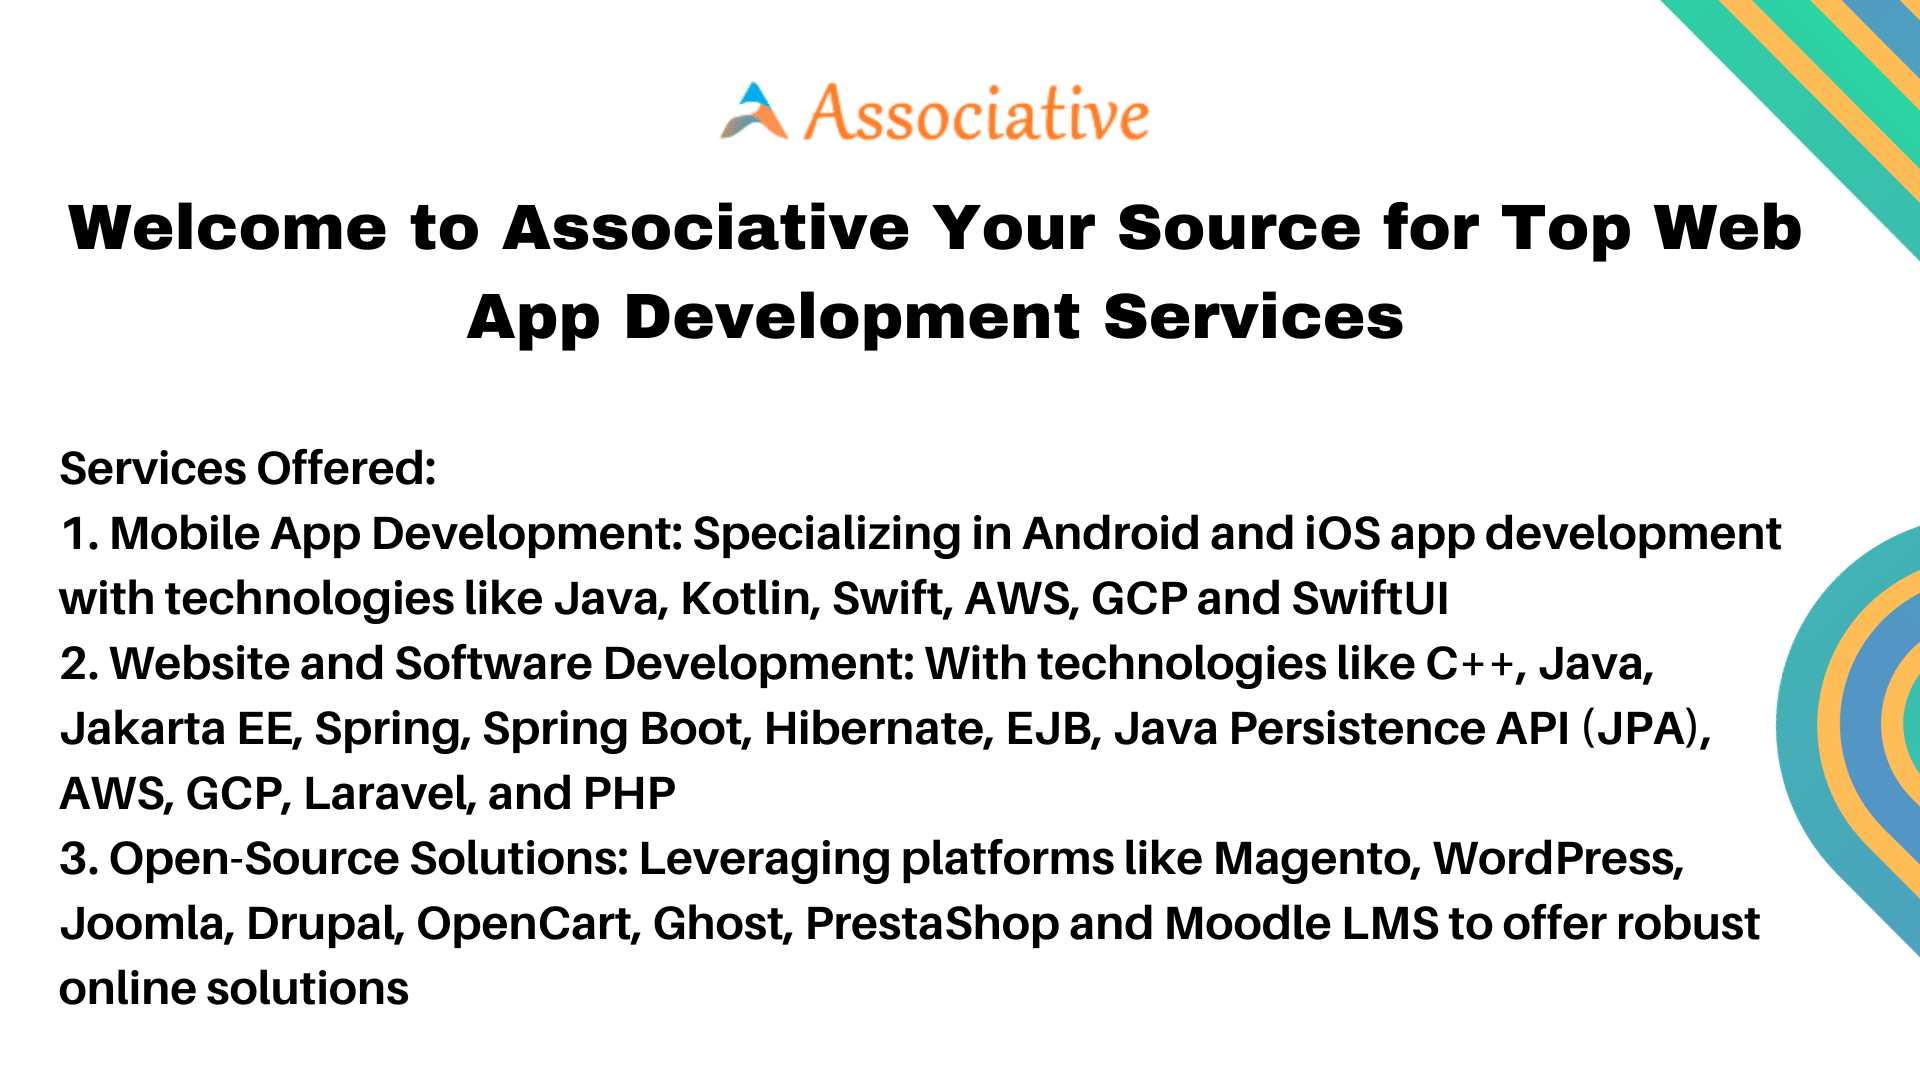 Welcome to Associative Your Source for Top Web App Development Services